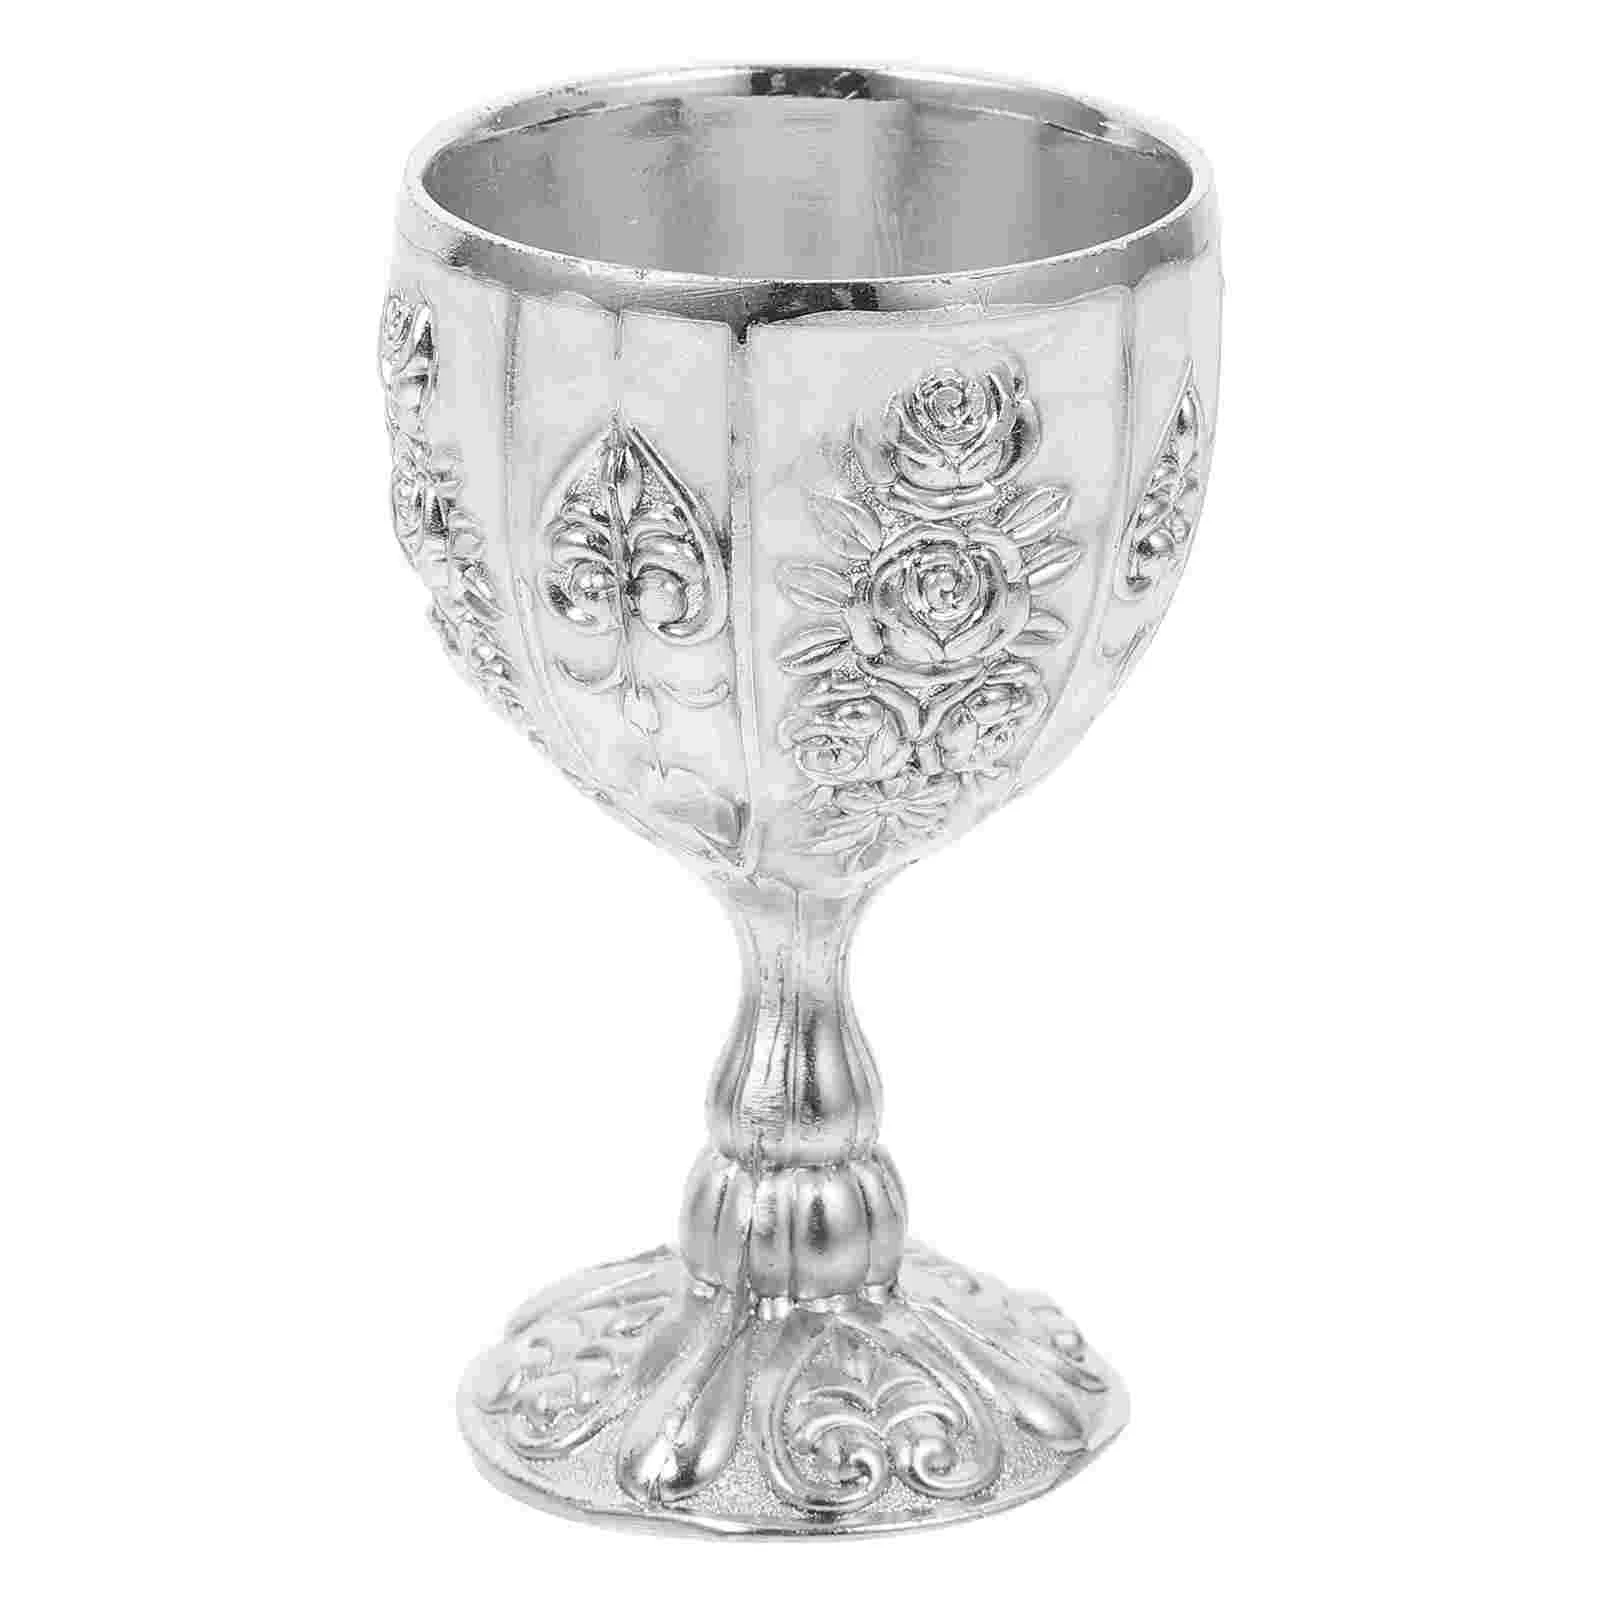 

Cup Goblet Chalice Glasses Vintage Cups Metal Medieval Retro European Shot Champagne Royal Cocktail Goblets Style Embossed Brass